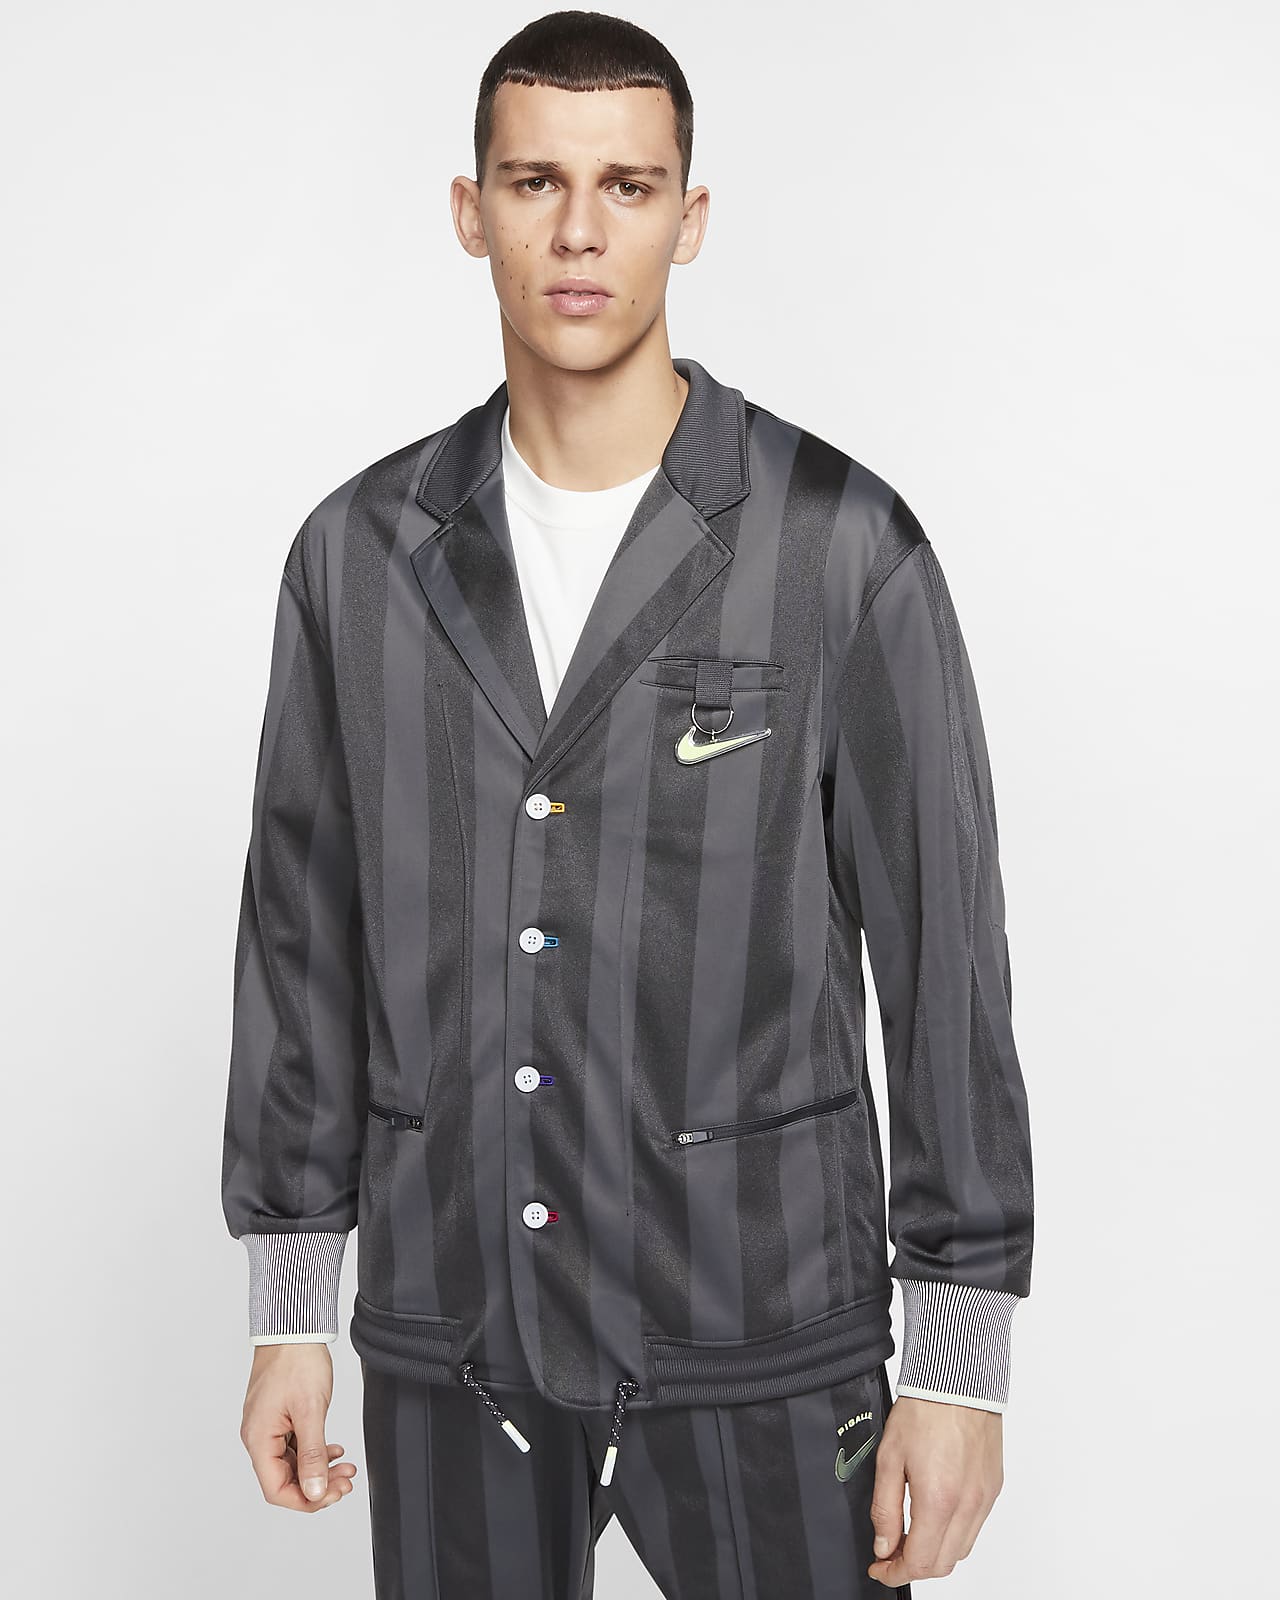 Nike x Pigalle Story Jacket 美コンディション　XL美コンディション